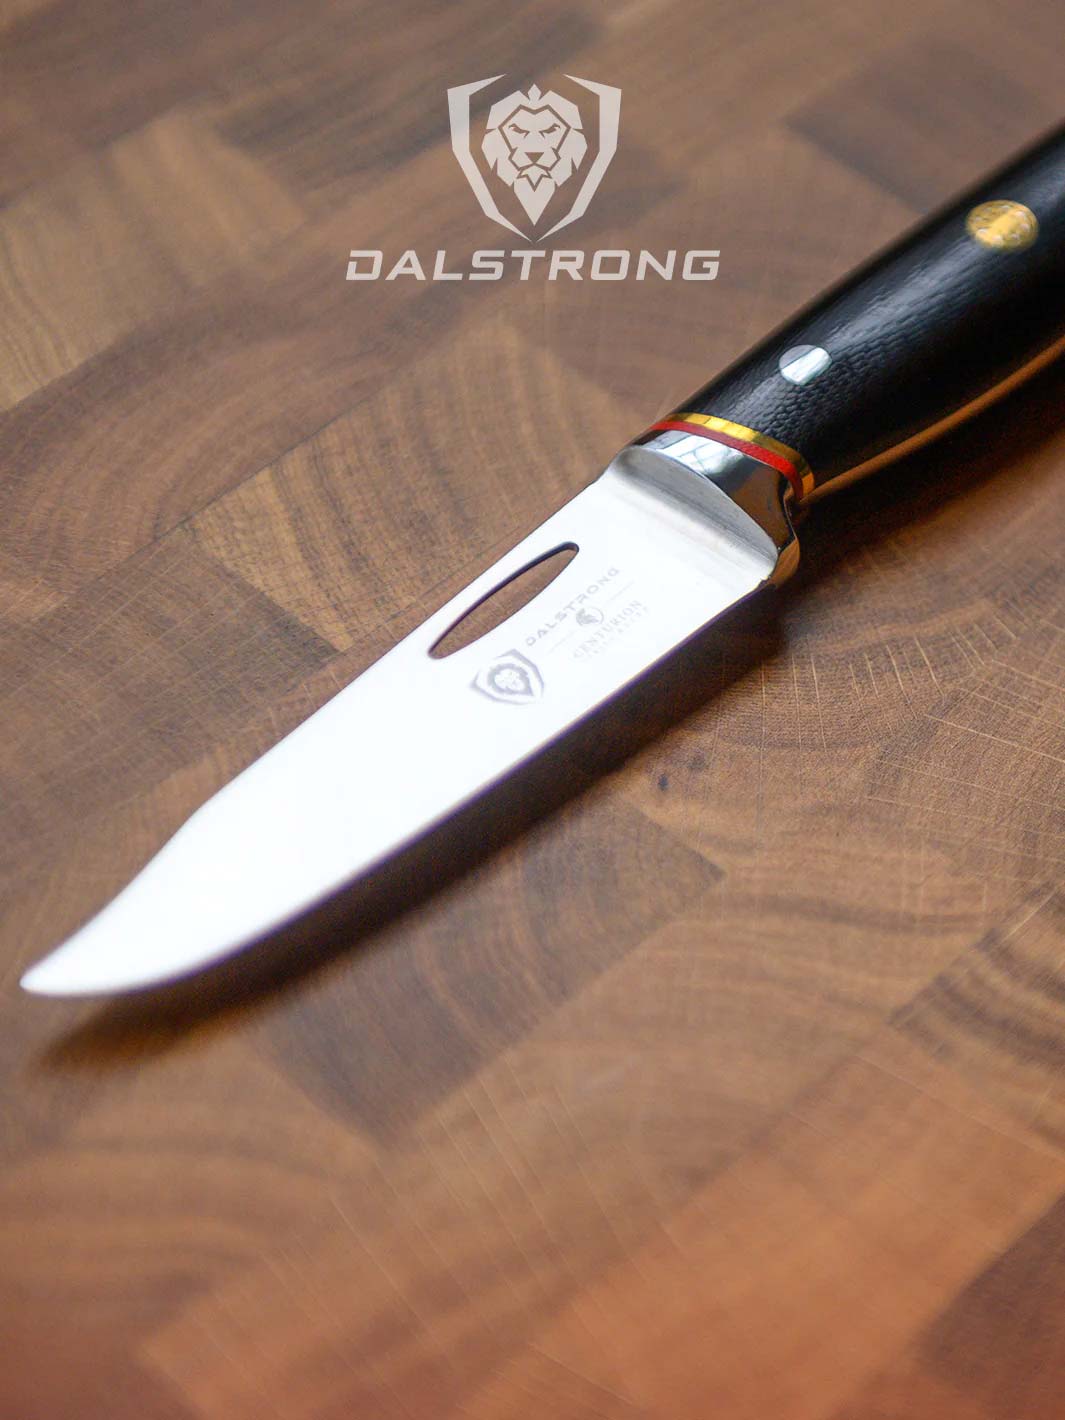 Dalstrong centurion series 3.5 inch paring knife with black handle on top of a cutting board.